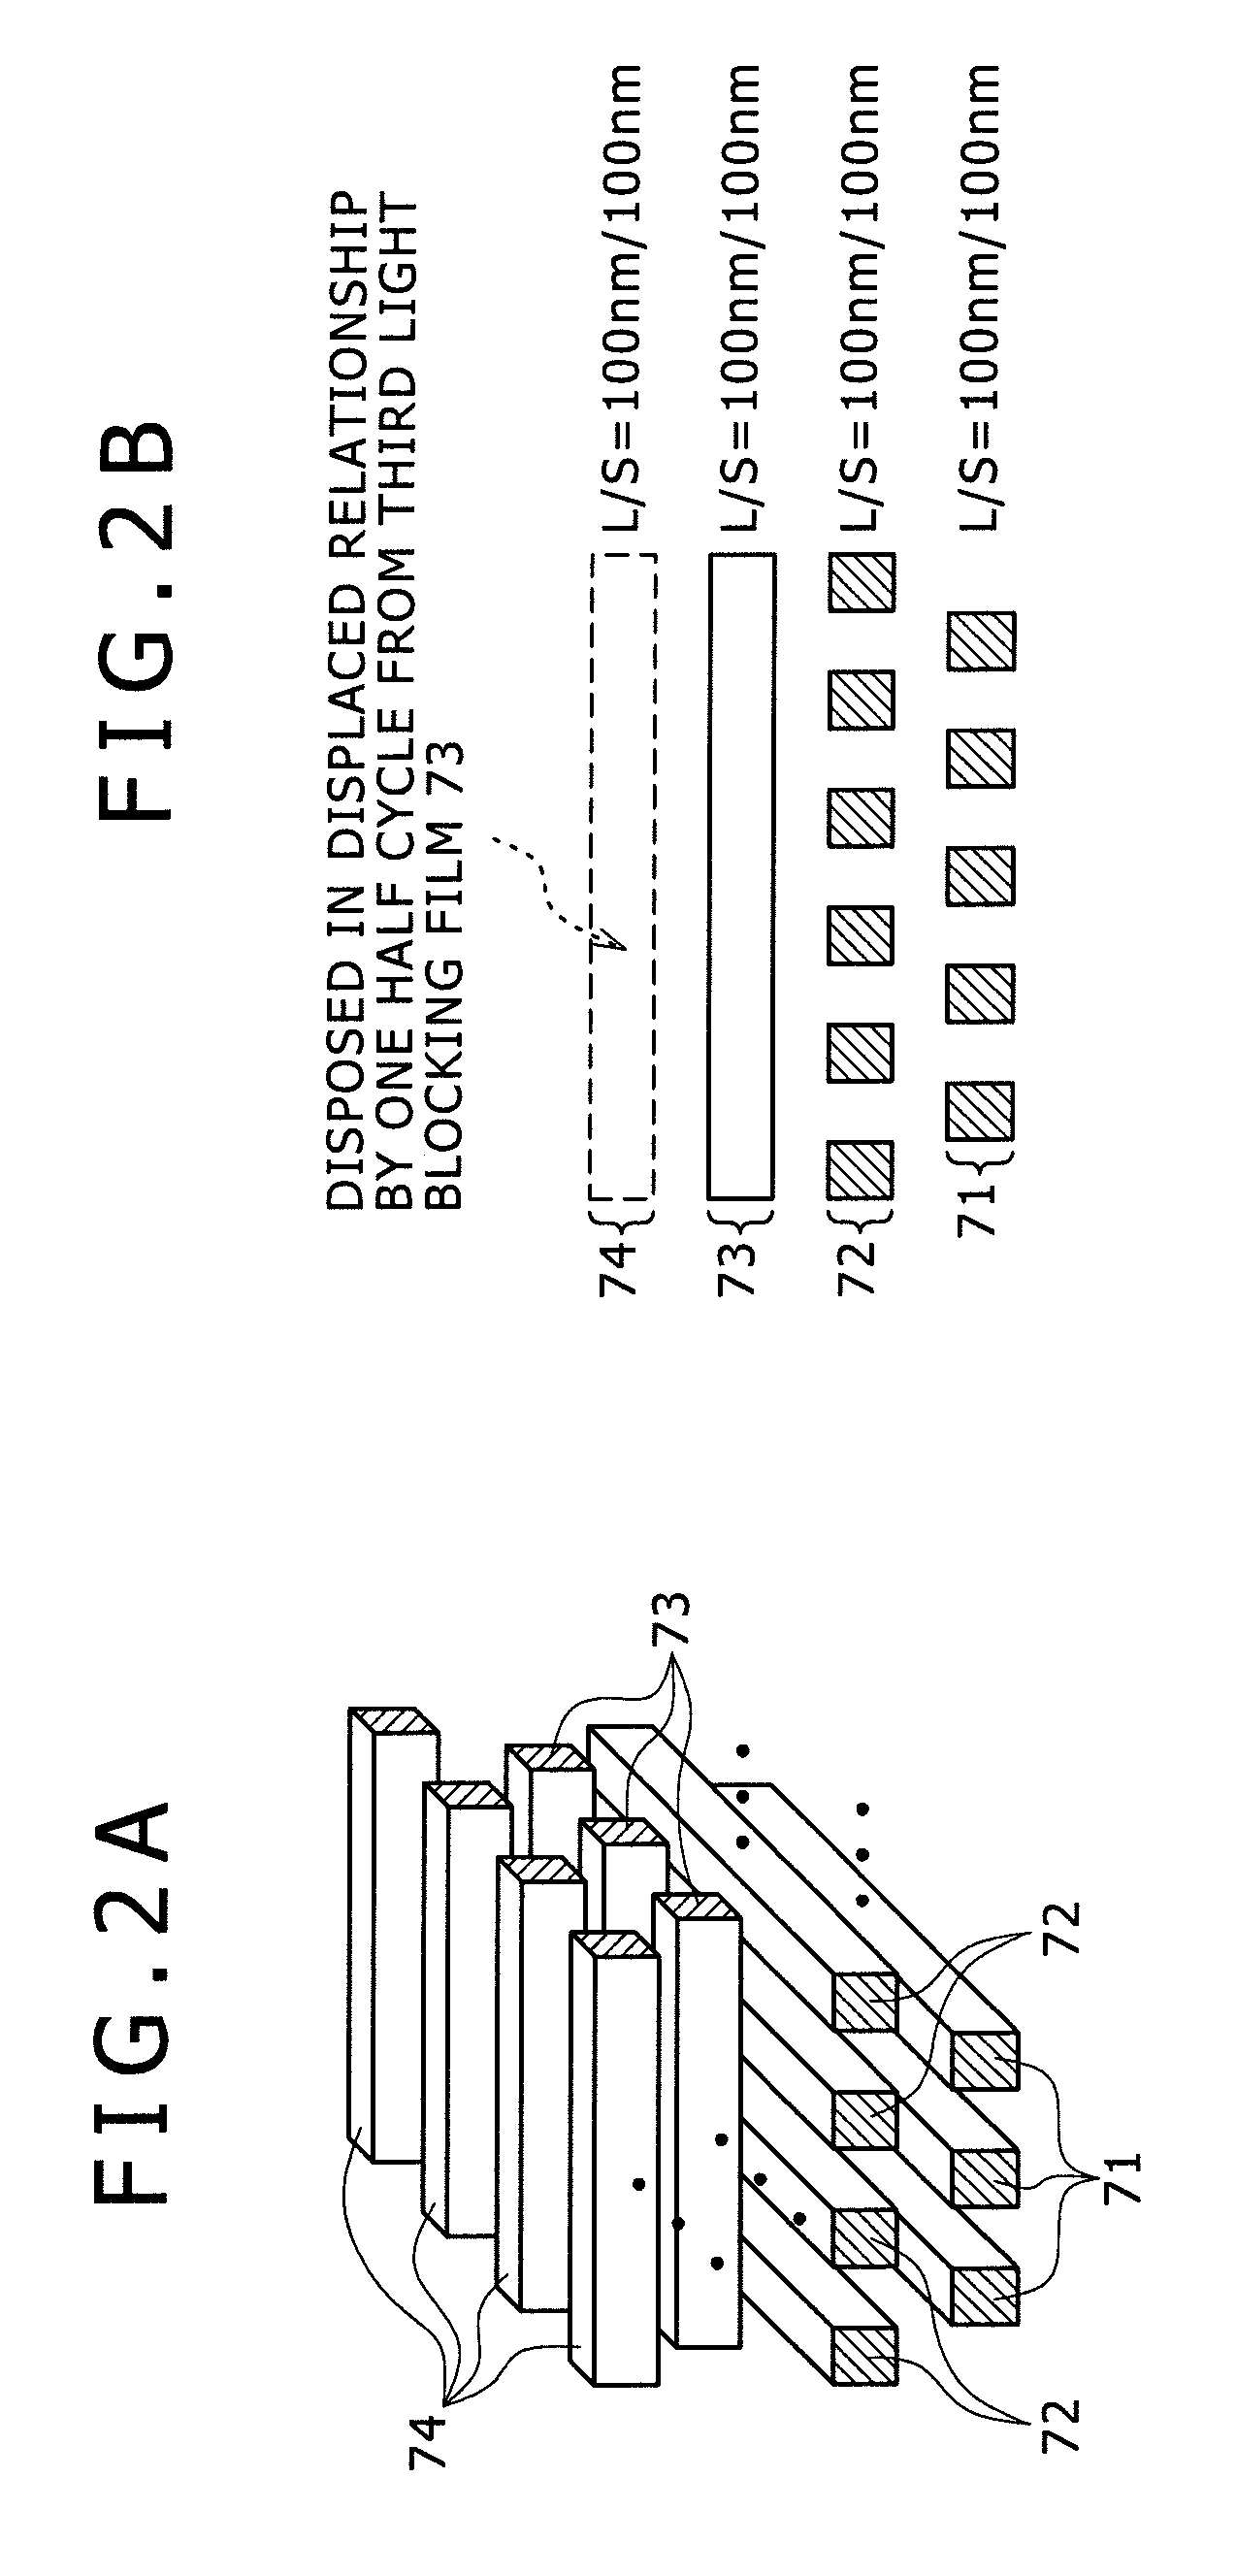 Solid-state image pickup device and fabrication method therefor